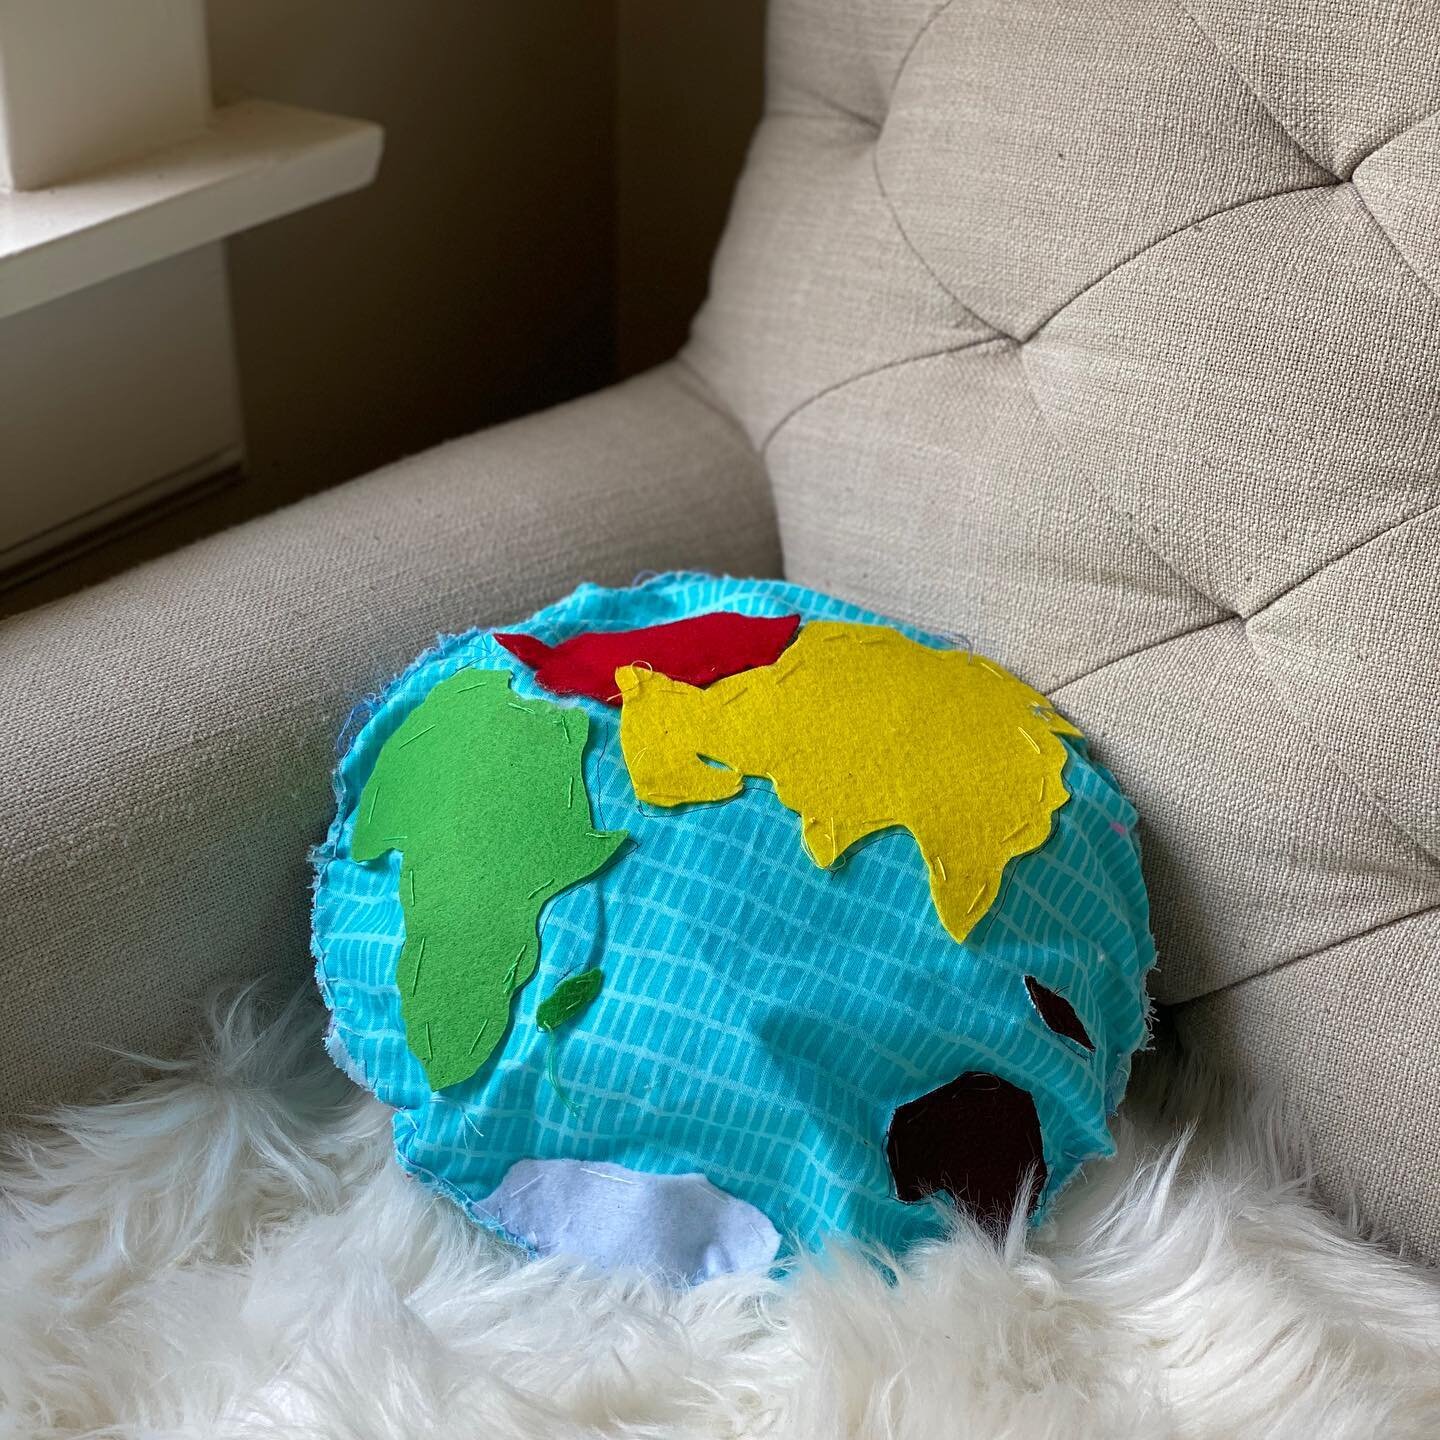 Sewing Around the World 🌎 Geography Project. Here&rsquo;s a hands on way to learn about the continents and oceans by studying a colored continent globe, on which the continents are shown in different colors and a flat map 🗺. In order to see how the